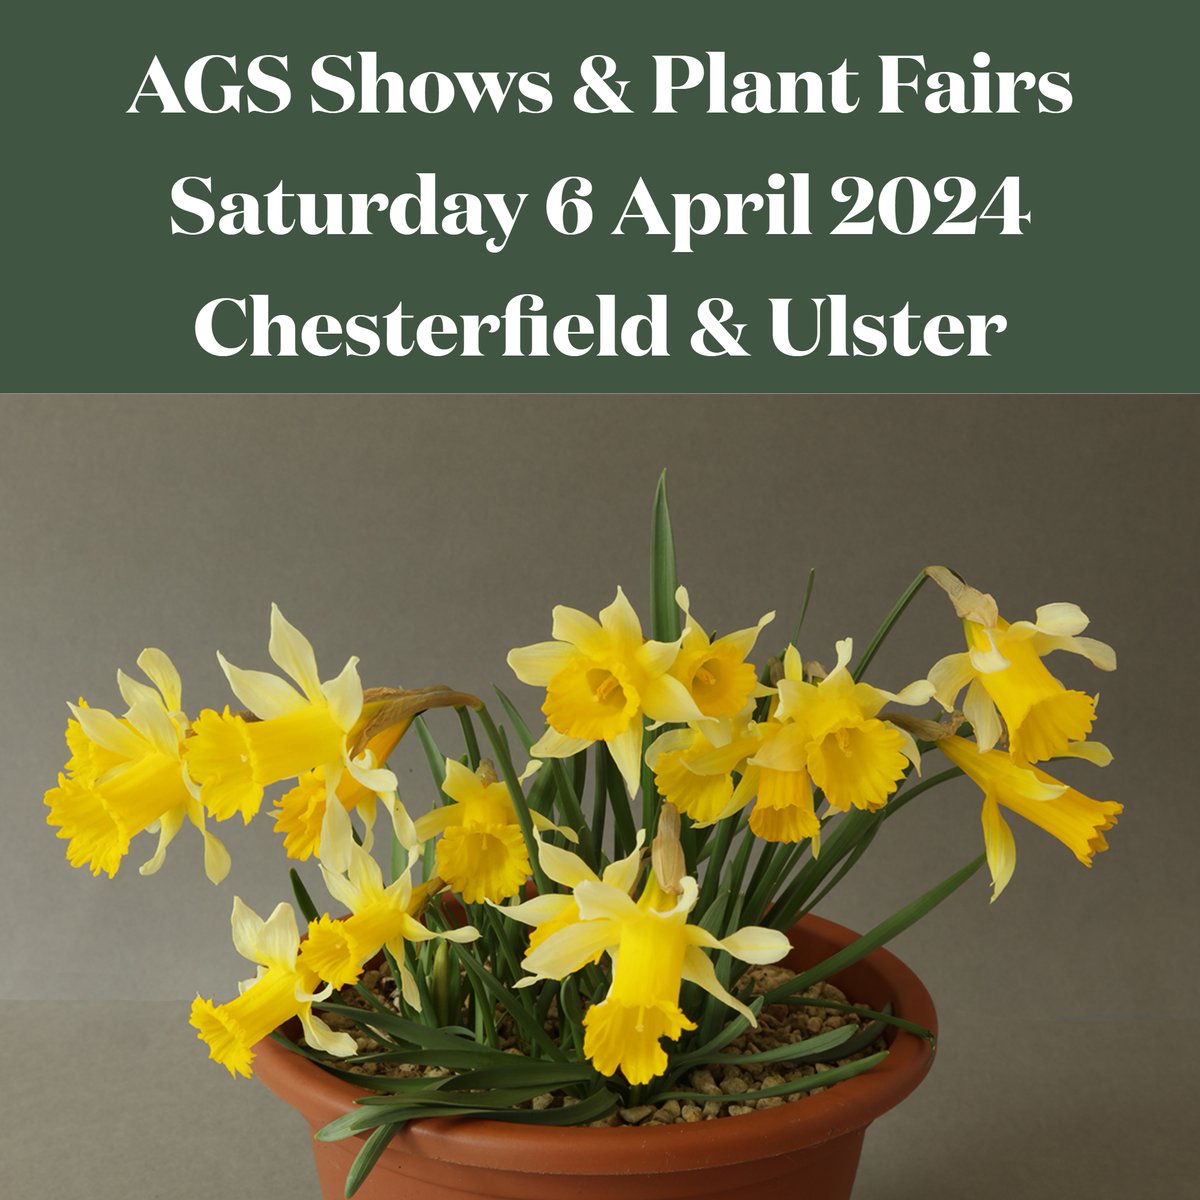 This Saturday we are organising Alpine Shows & Plant Fairs in Chesterfield & Ulster. Visit the North Midland at the Arkwright Centre, Chesterfield S44 5BS. Visit the Ulster show at the Greenmount Agricultural & Horticultural College, Muckamore, Co. Antrim, BT41 4PU.